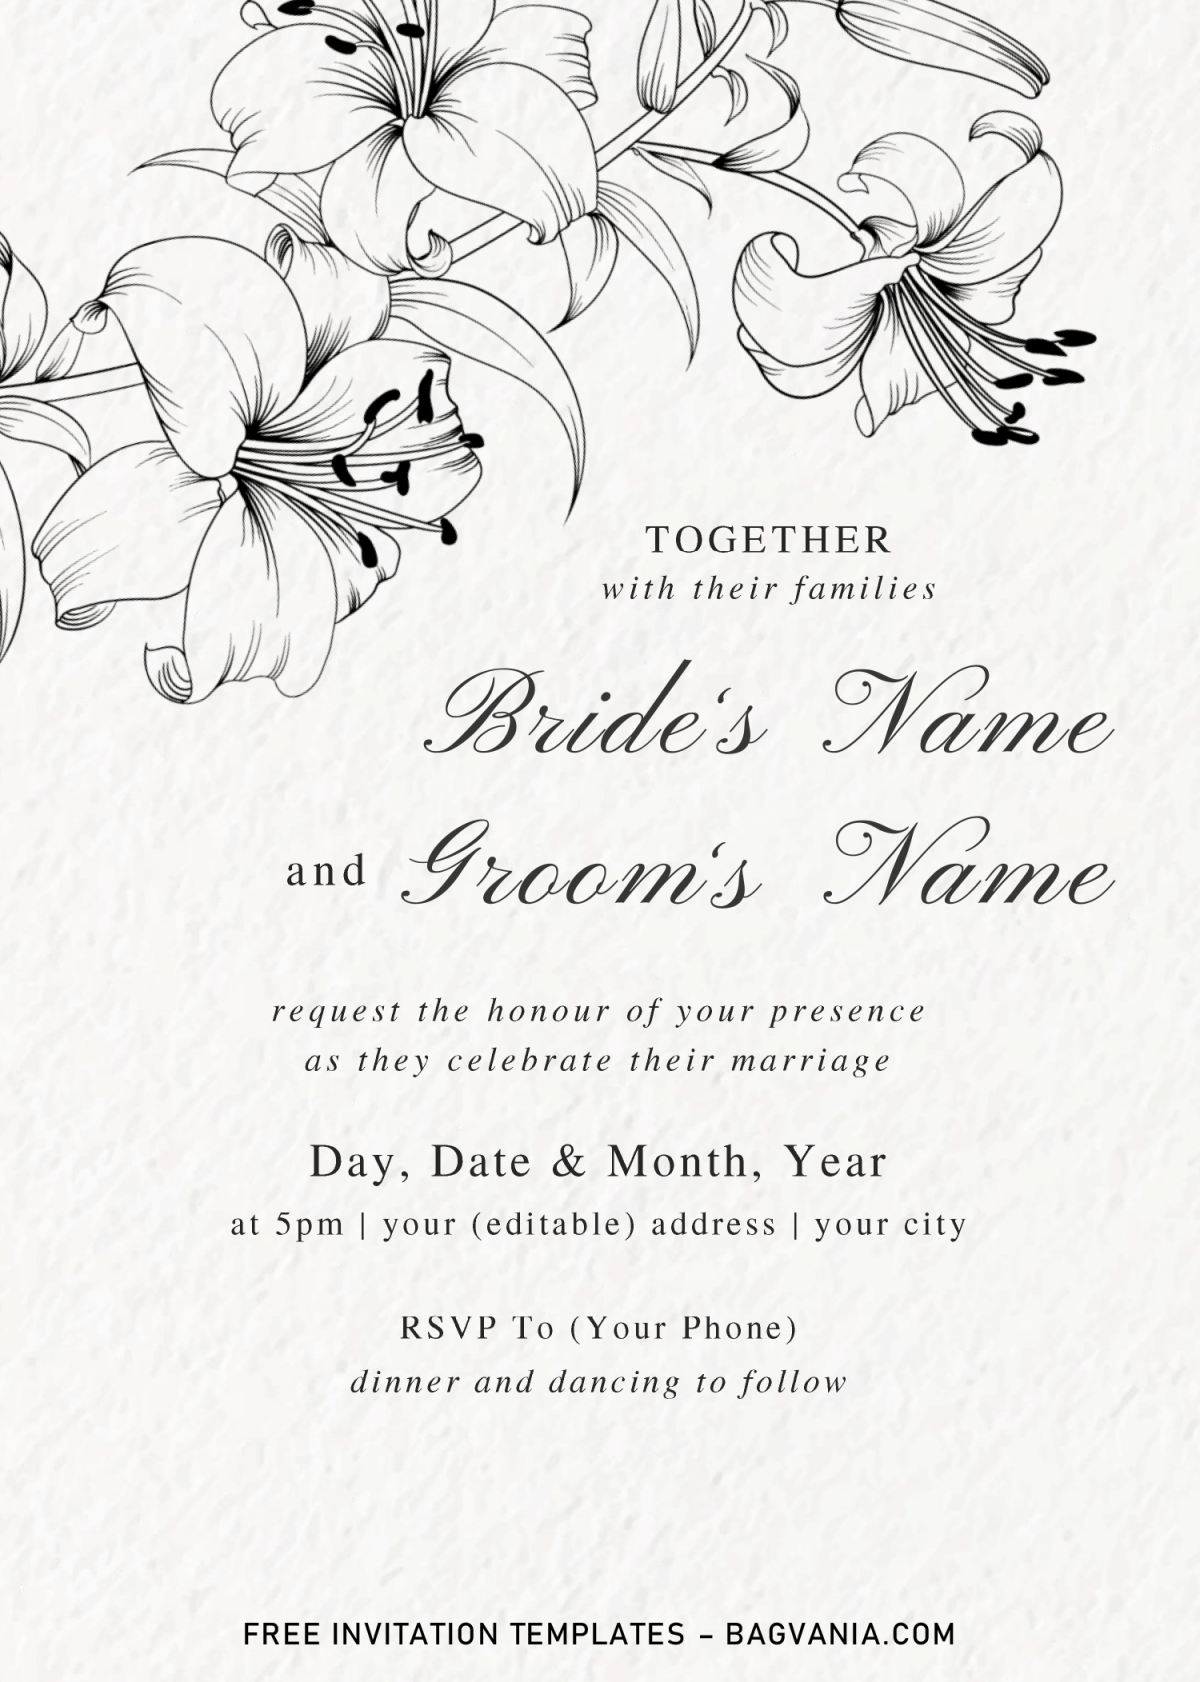 Botanical Branches Invitation Templates - Editable .Docx and has hibiscus flowers